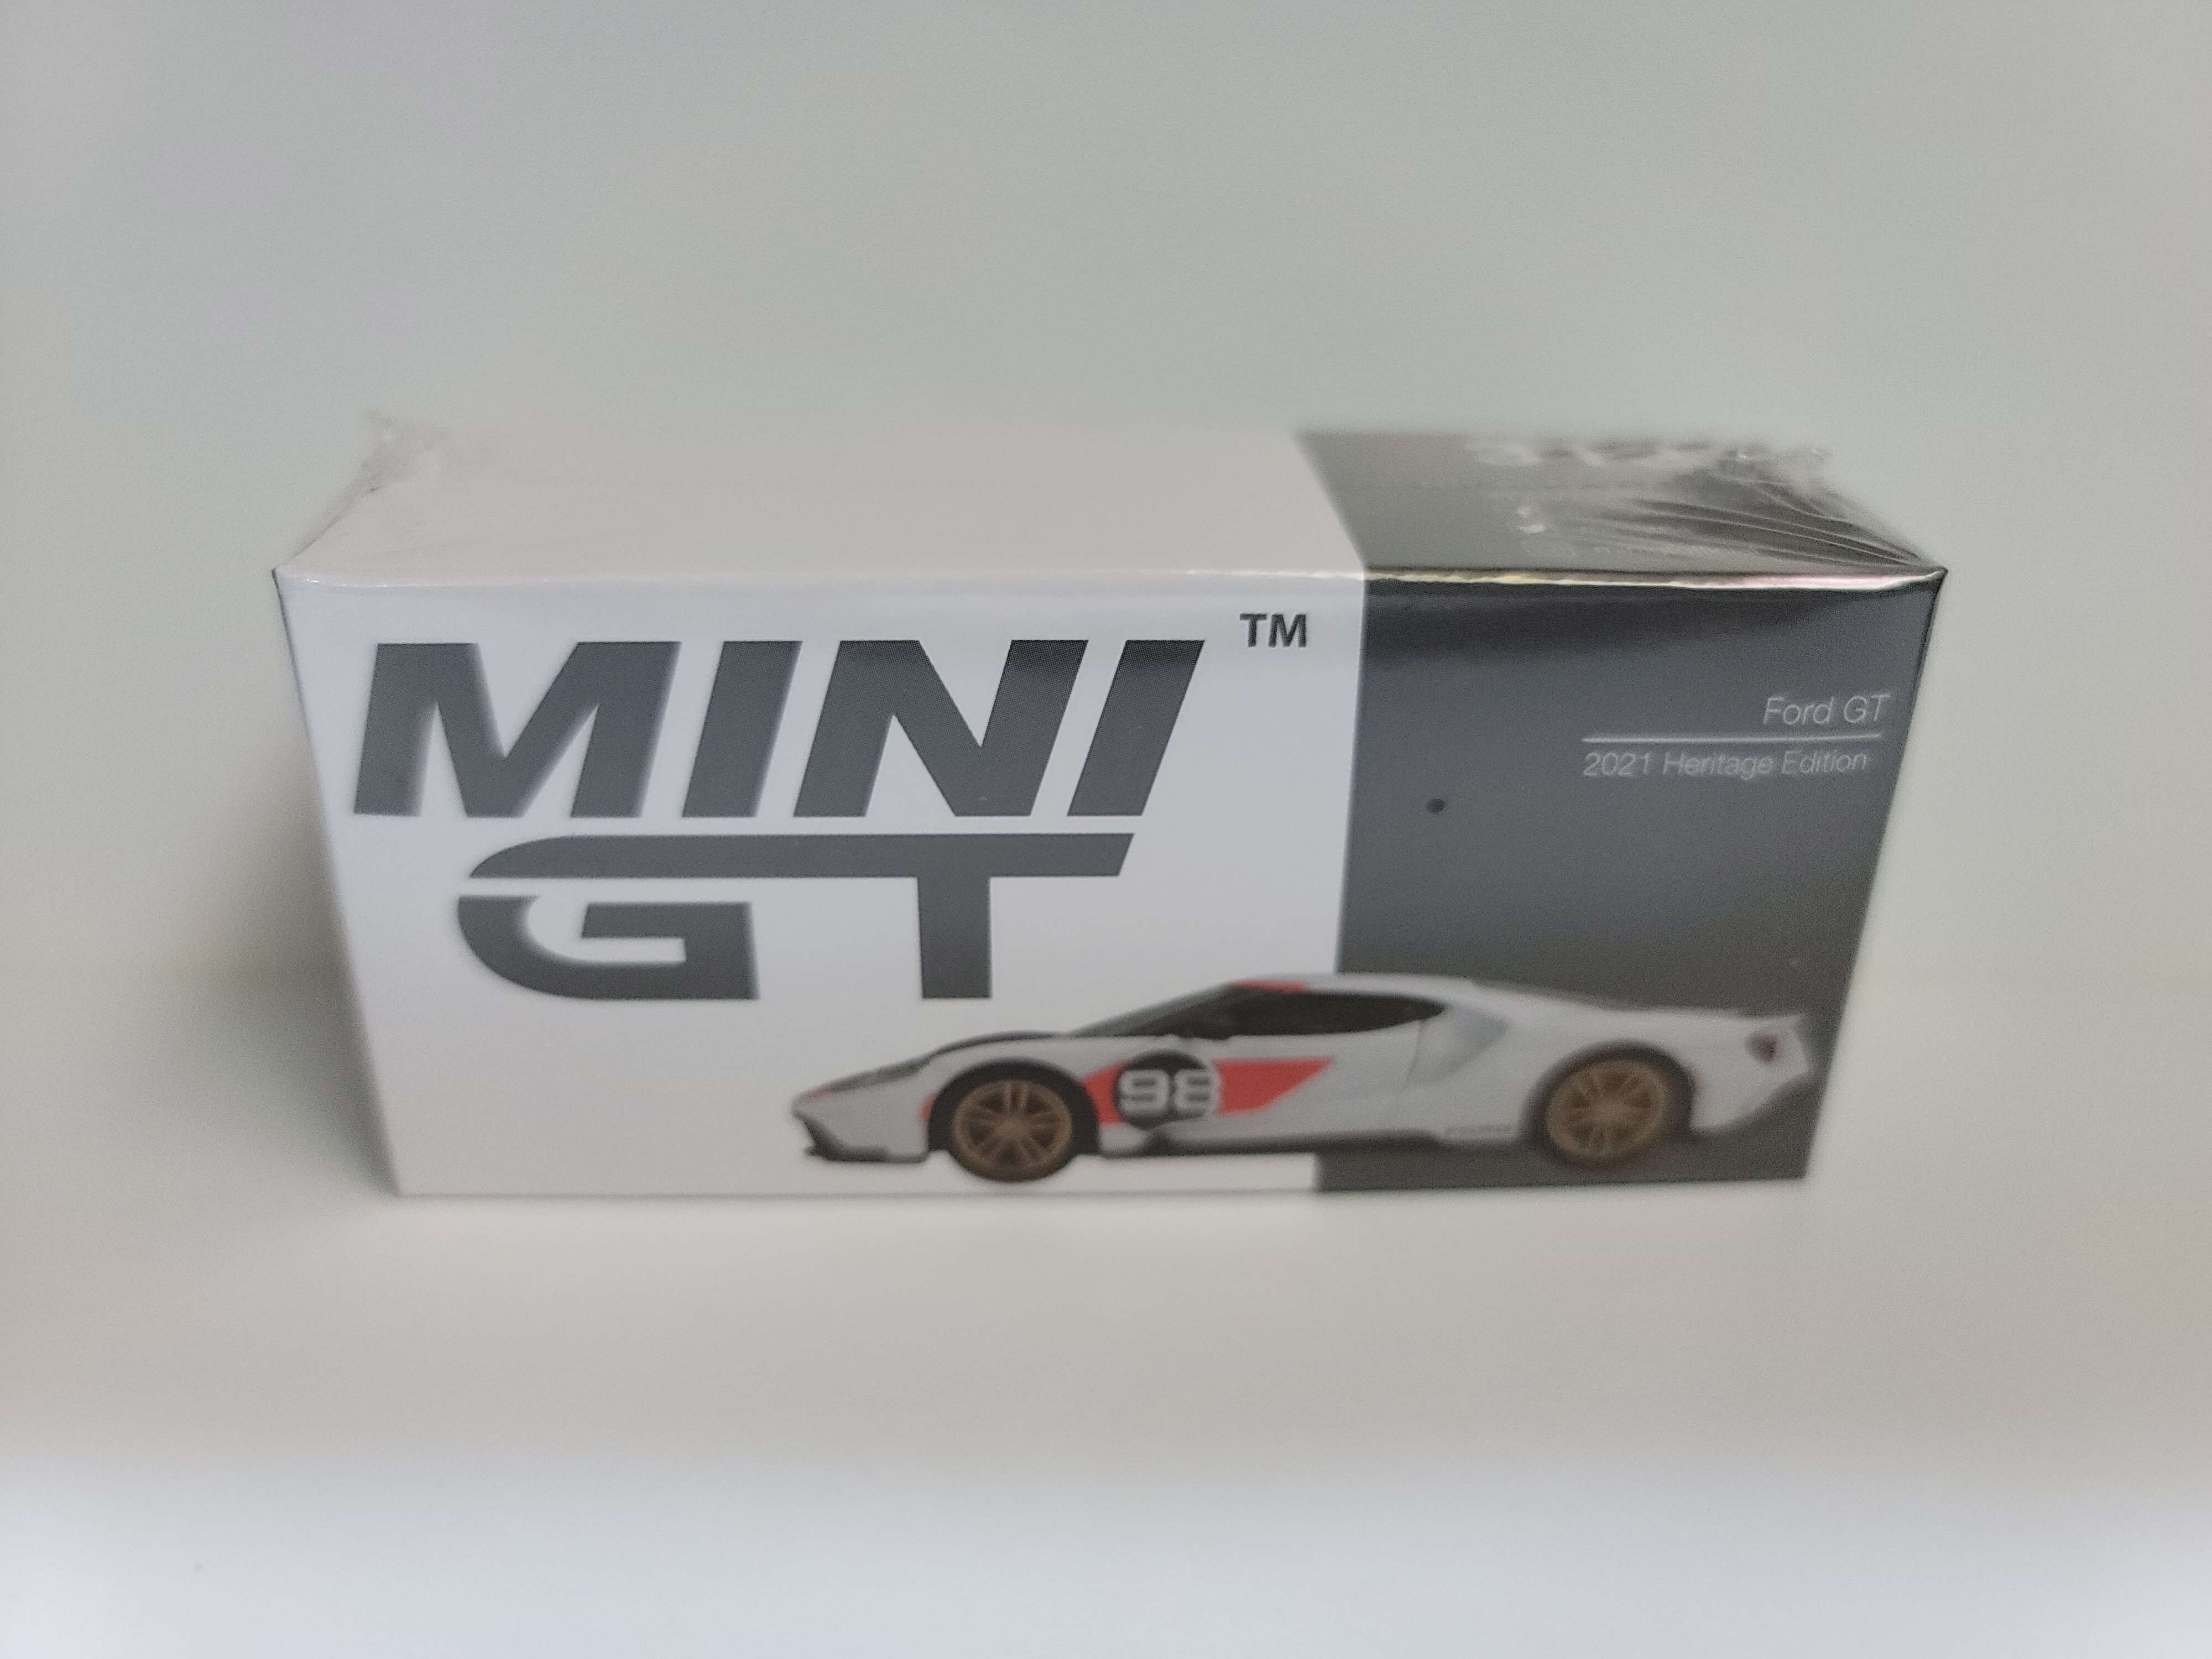 Mini GT 1/64 No.313 Ford GT 2021 Heritage Edition